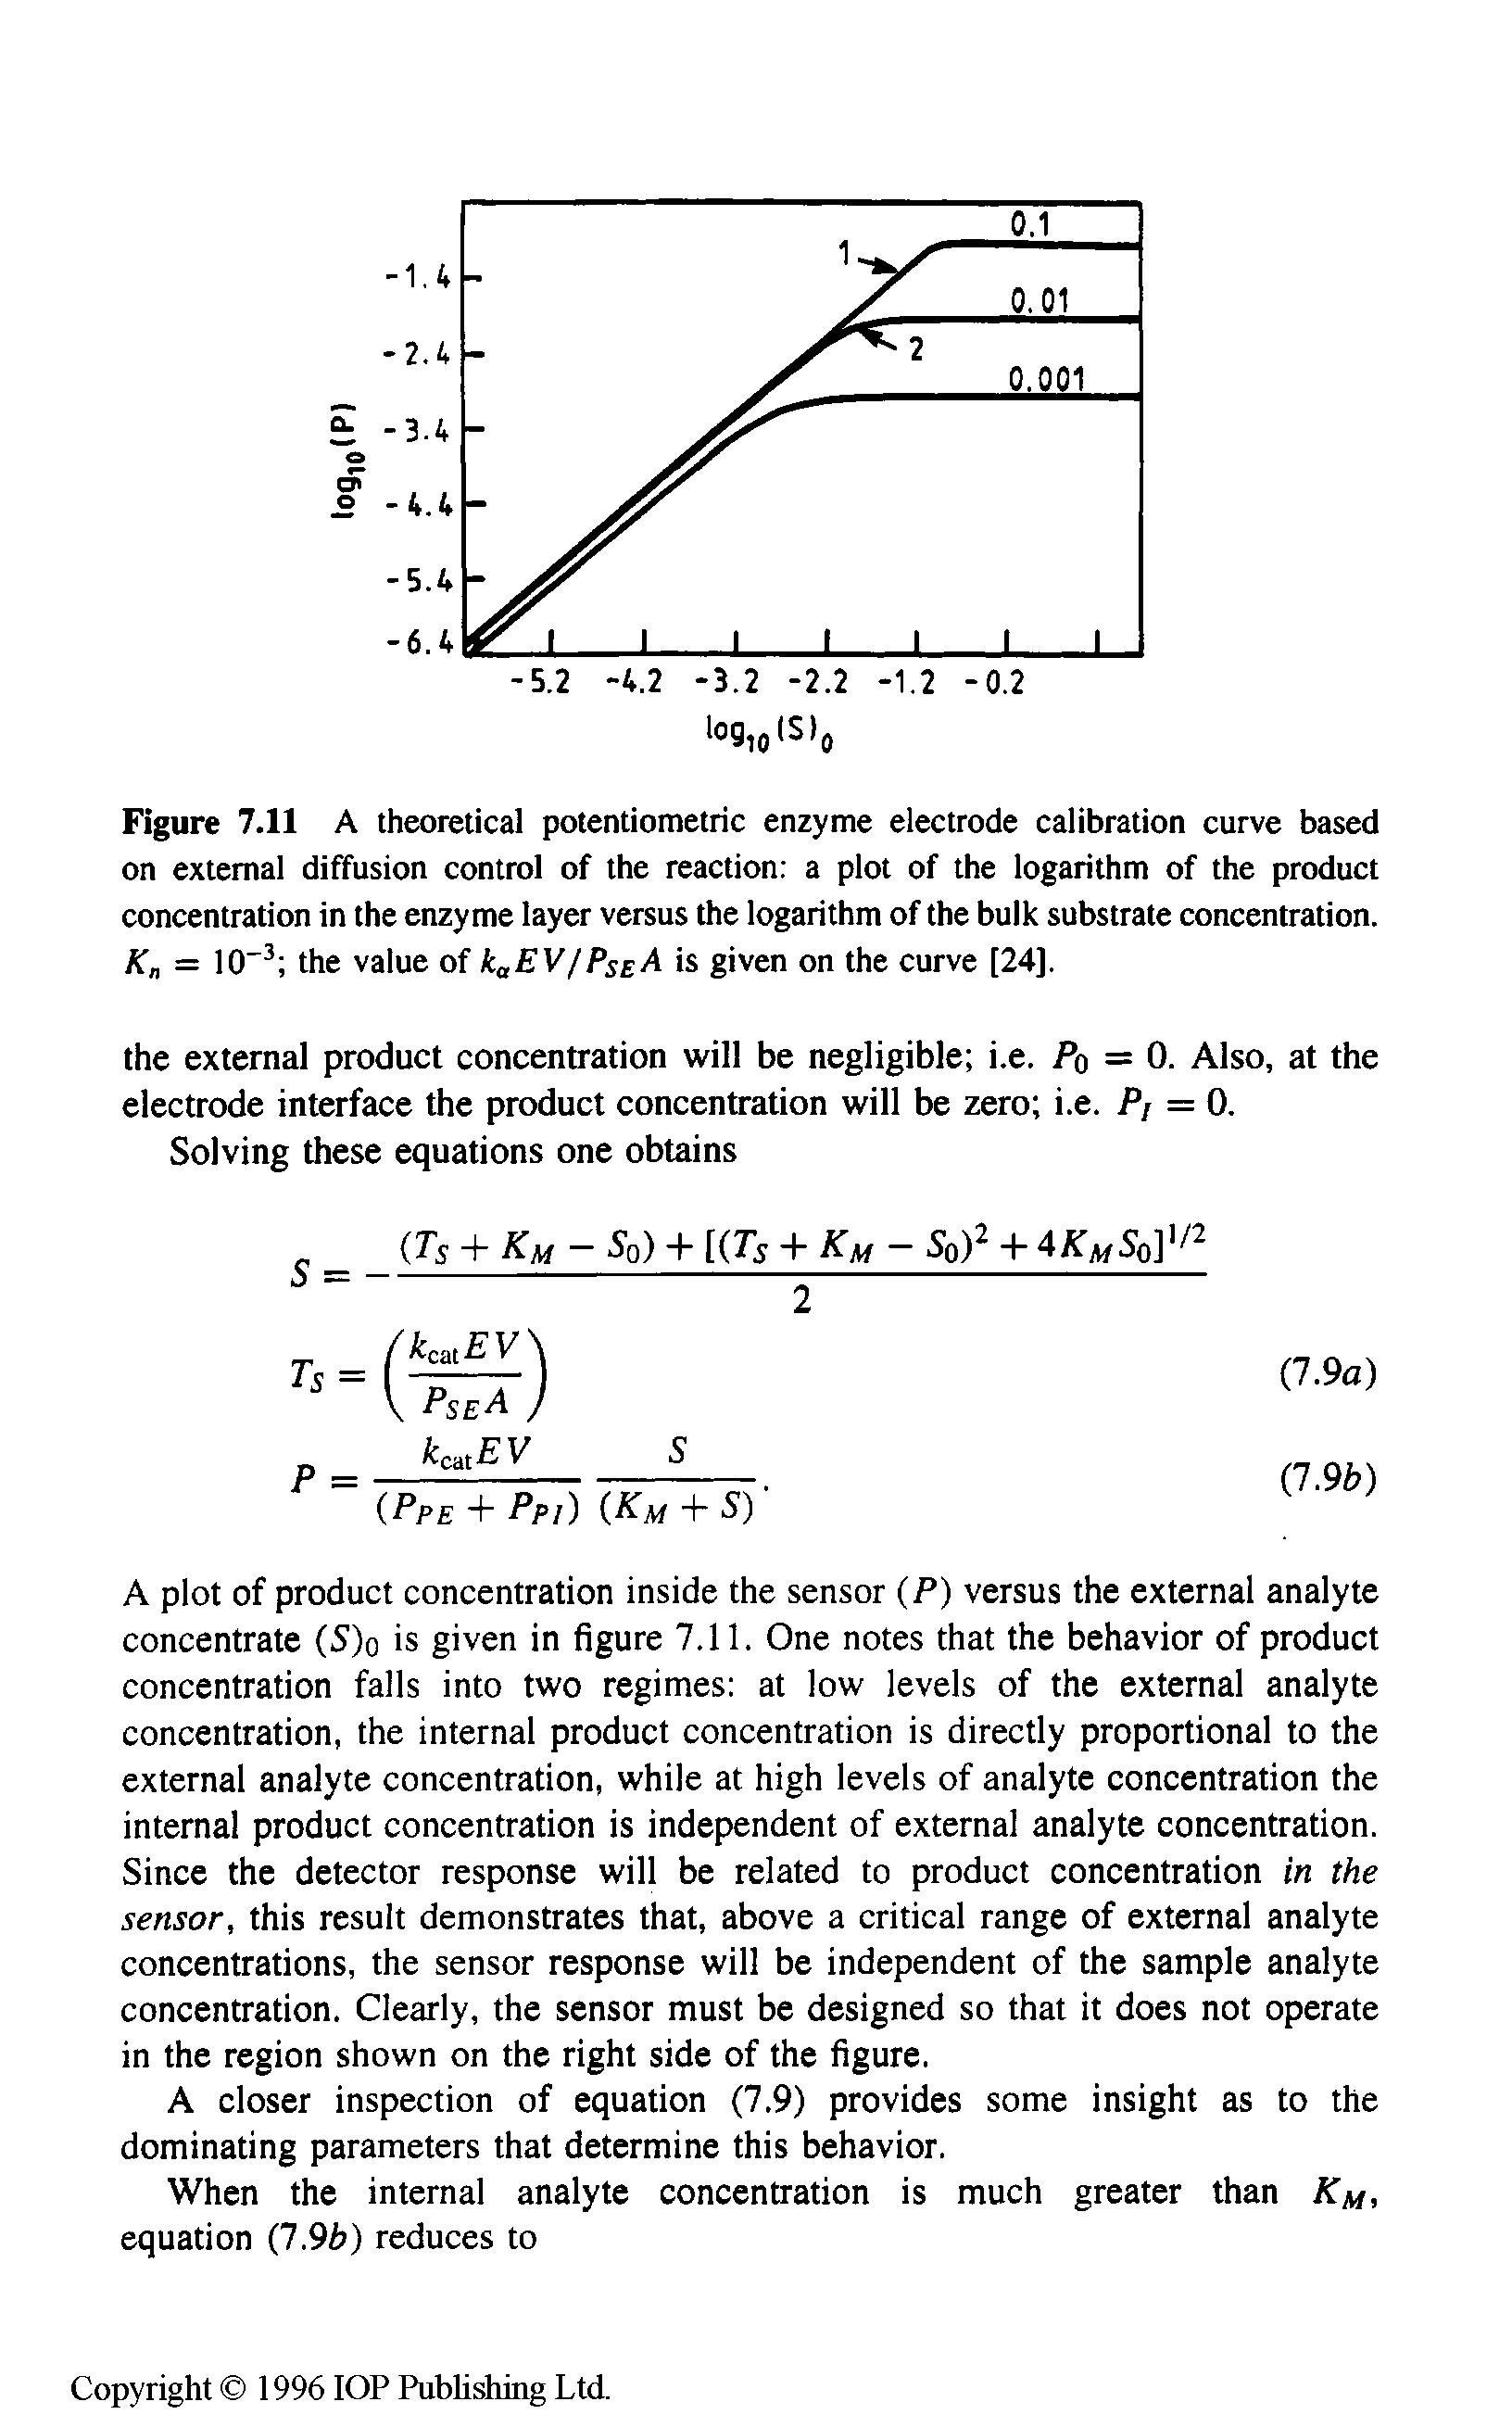 Figure 7.11 A theoretical potentiometric enzyme electrode calibration curve based on external diffusion control of the reaction a plot of the logarithm of the product concentration in the enzyme layer versus the logarithm of the bulk substrate concentration. K = 10" the value of kaEV/PsE is given on the curve [24],...